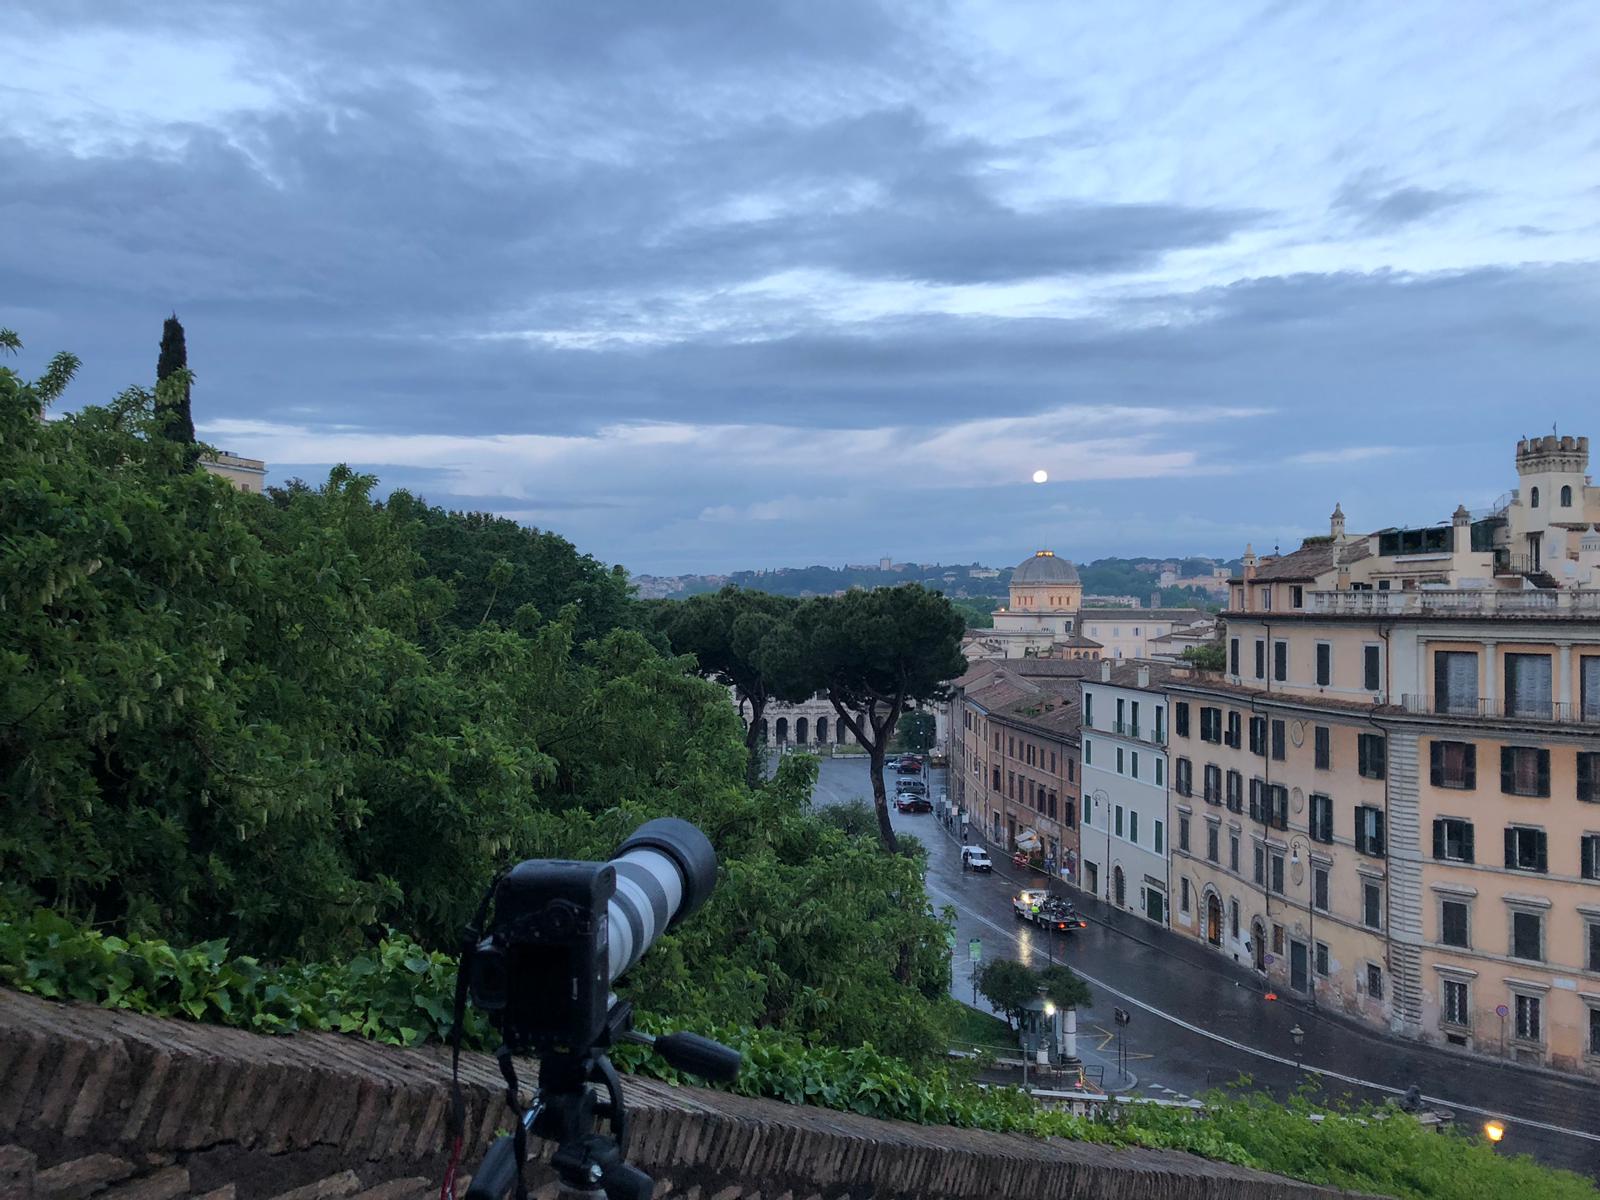 Ready to image, while the Moon is visible trough clouds